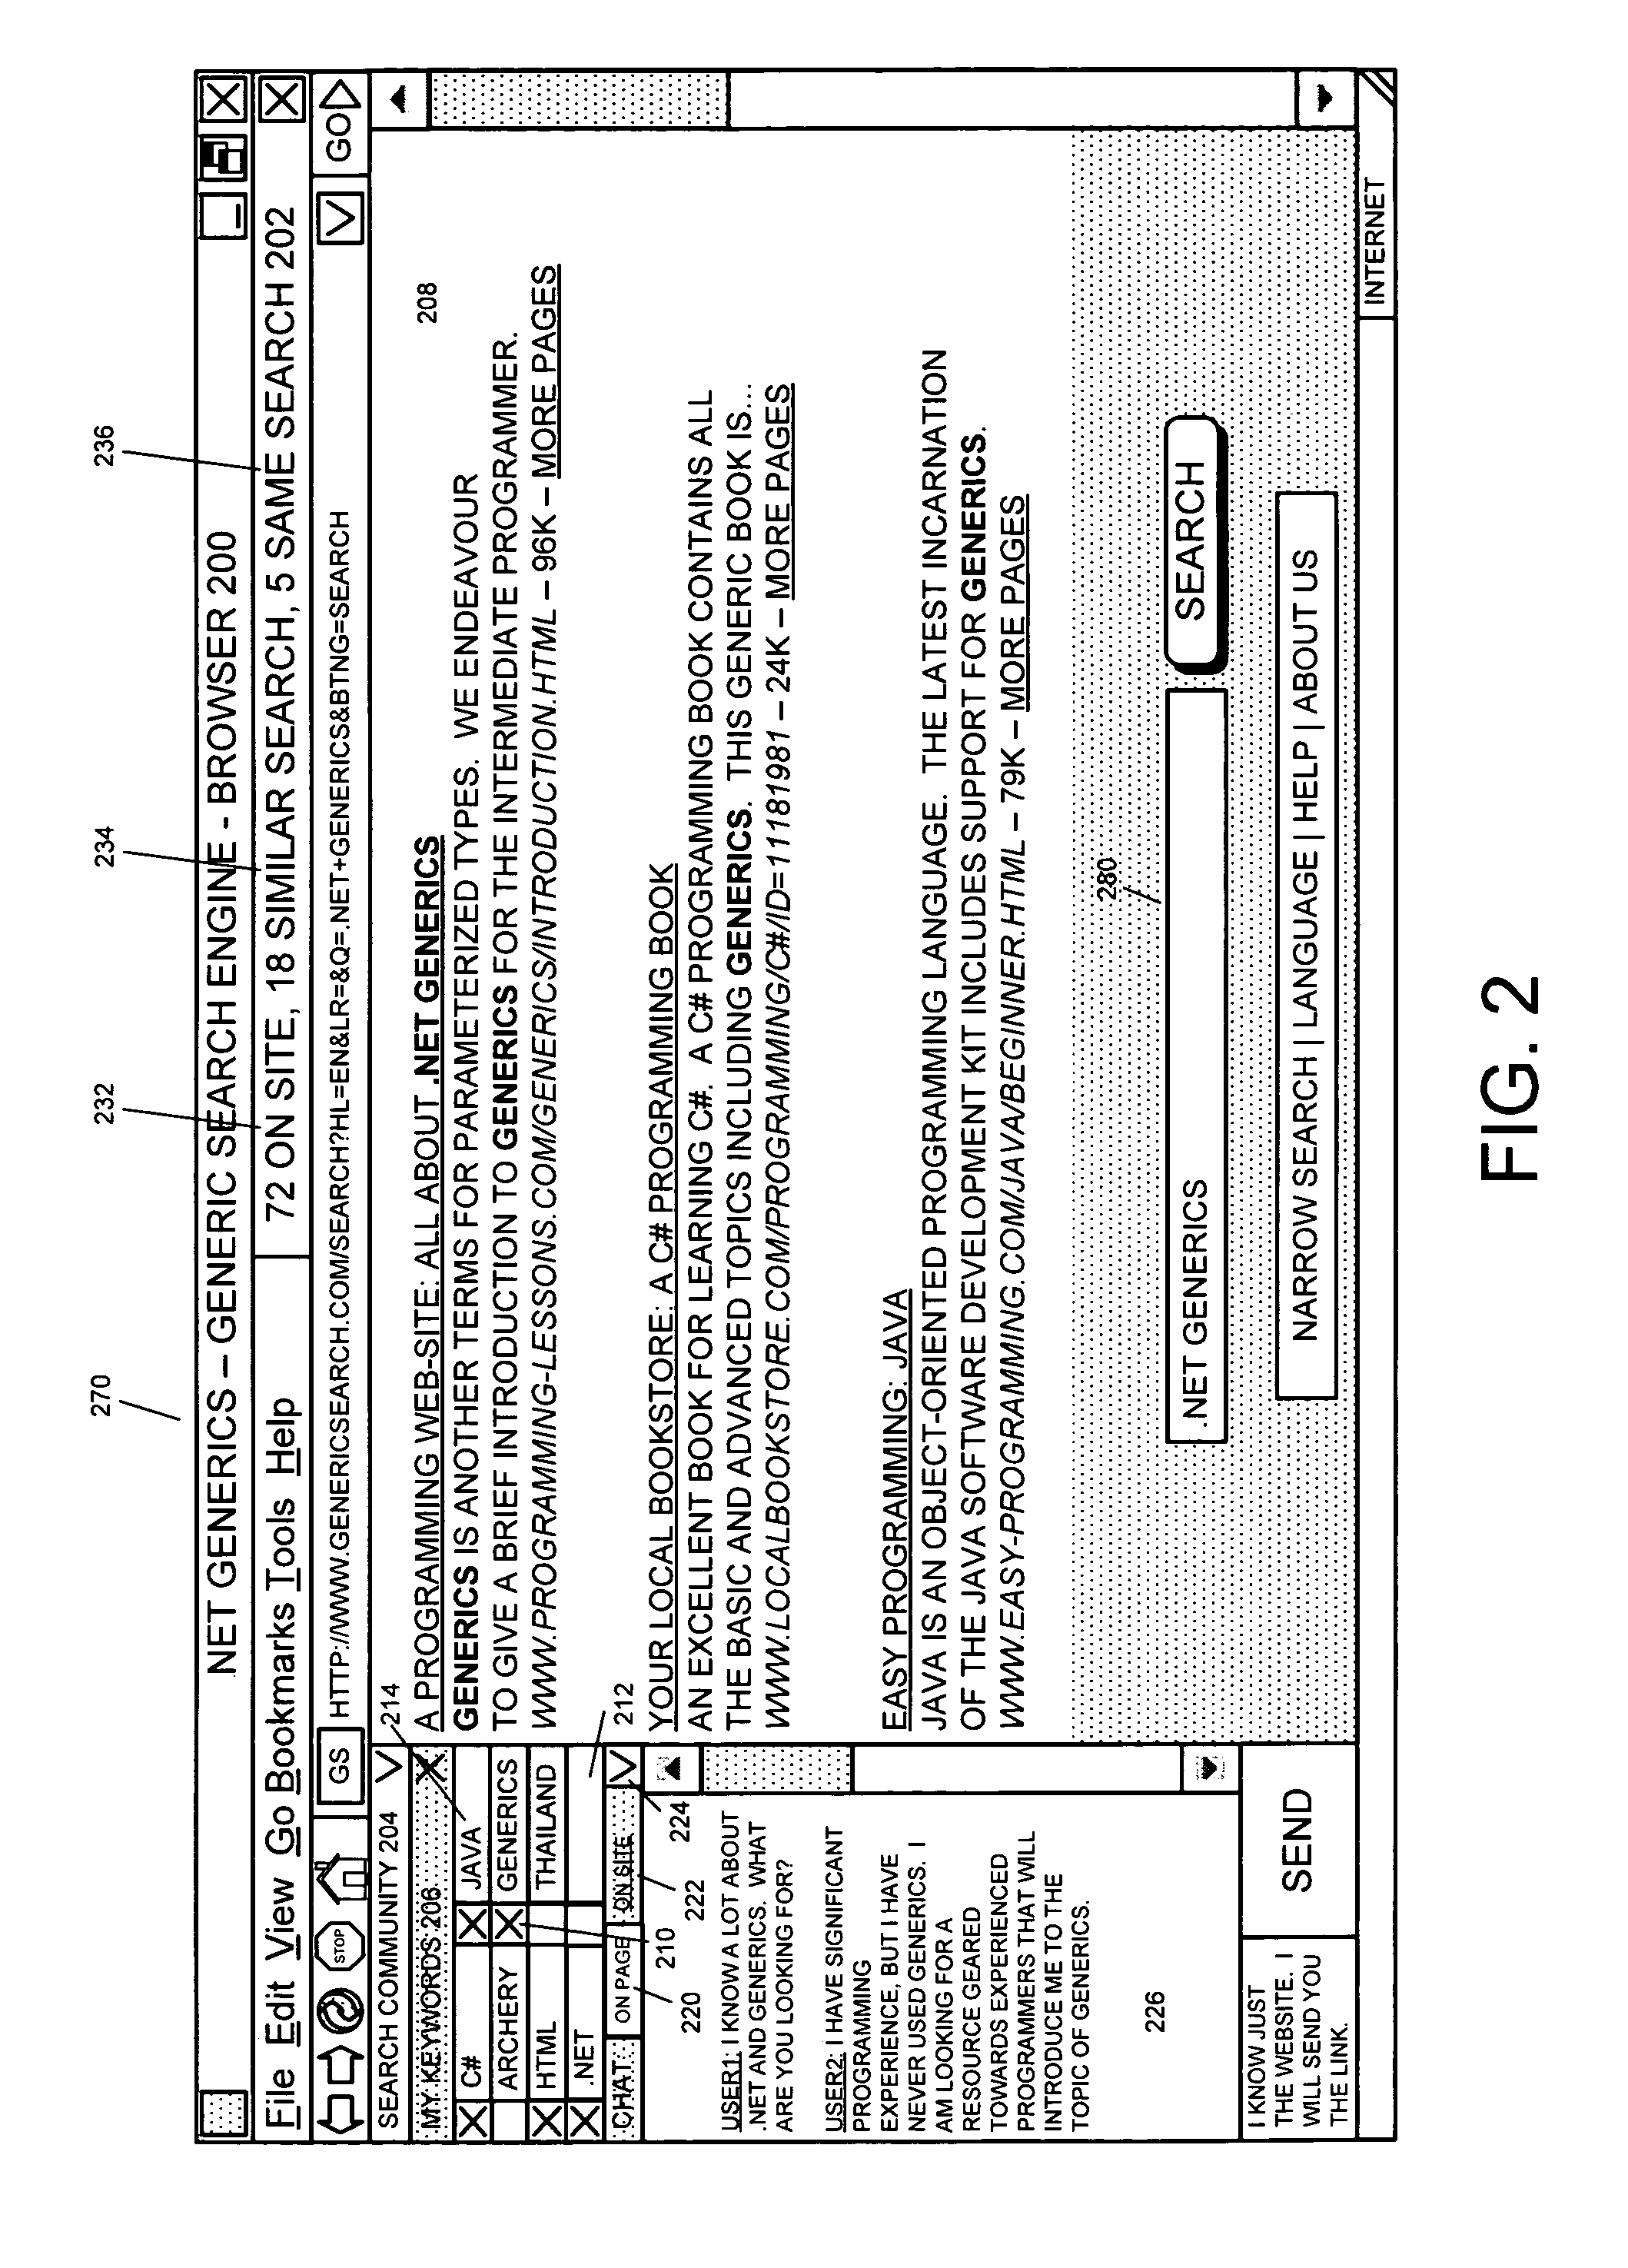 Method and apparatus for performing collaborative searches